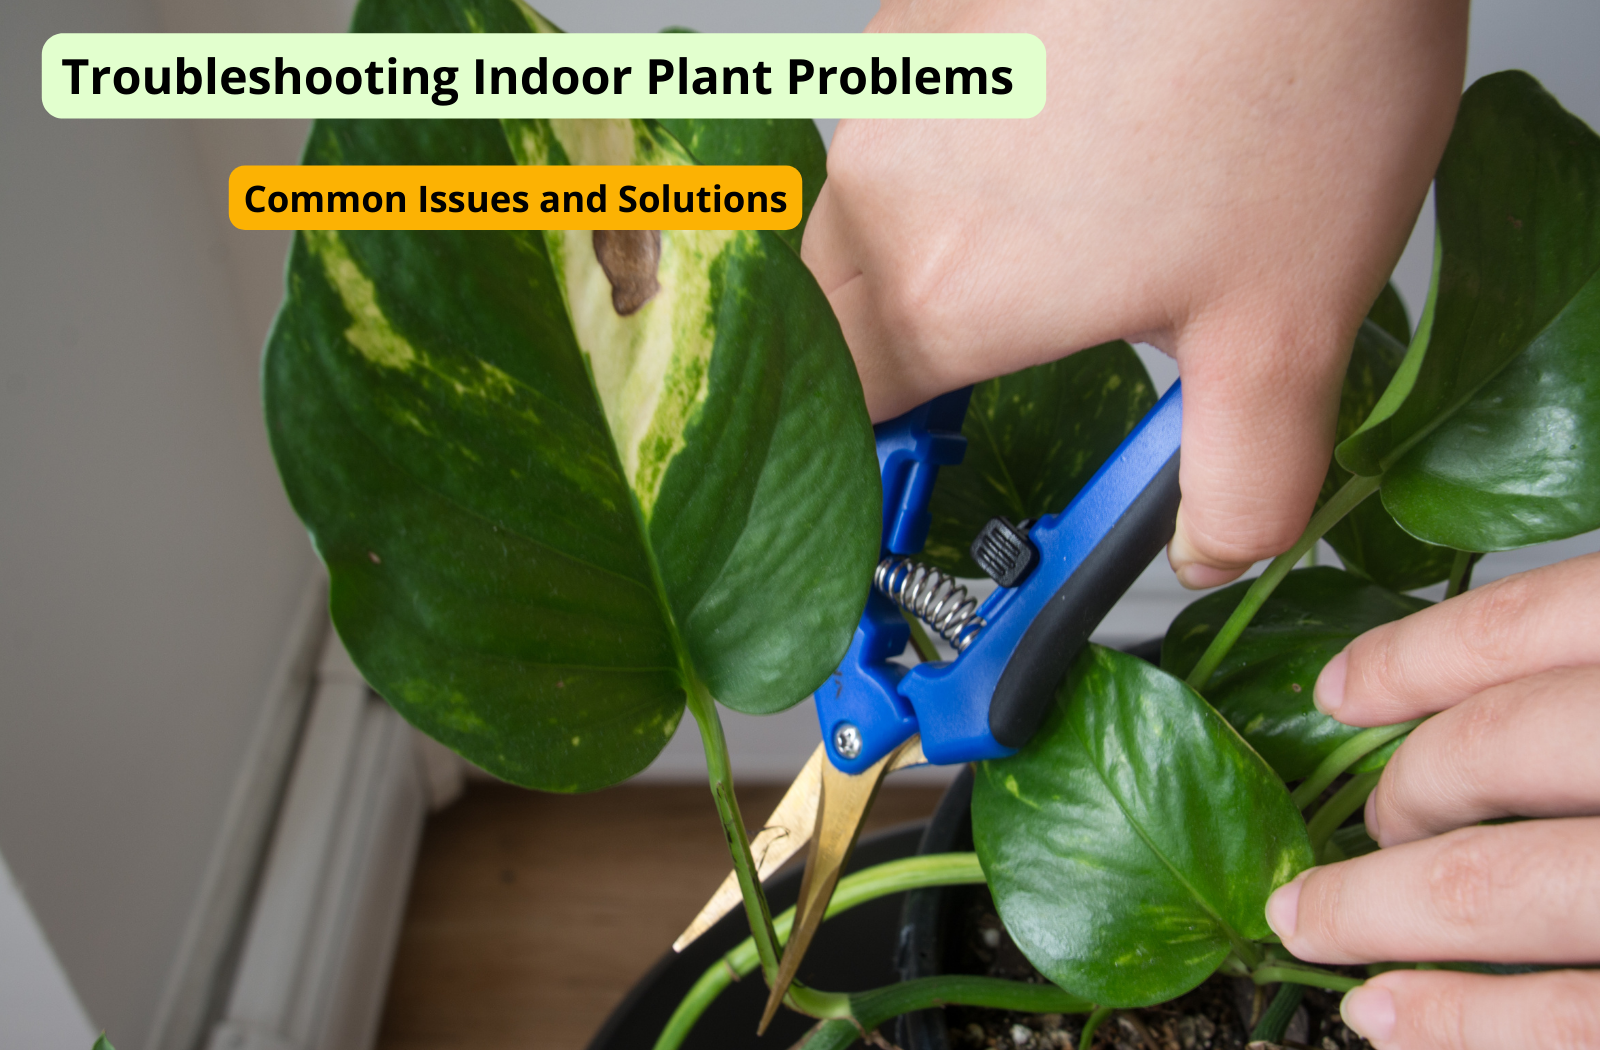 Troubleshooting Indoor Plant Problems: Common Issues and Solutions